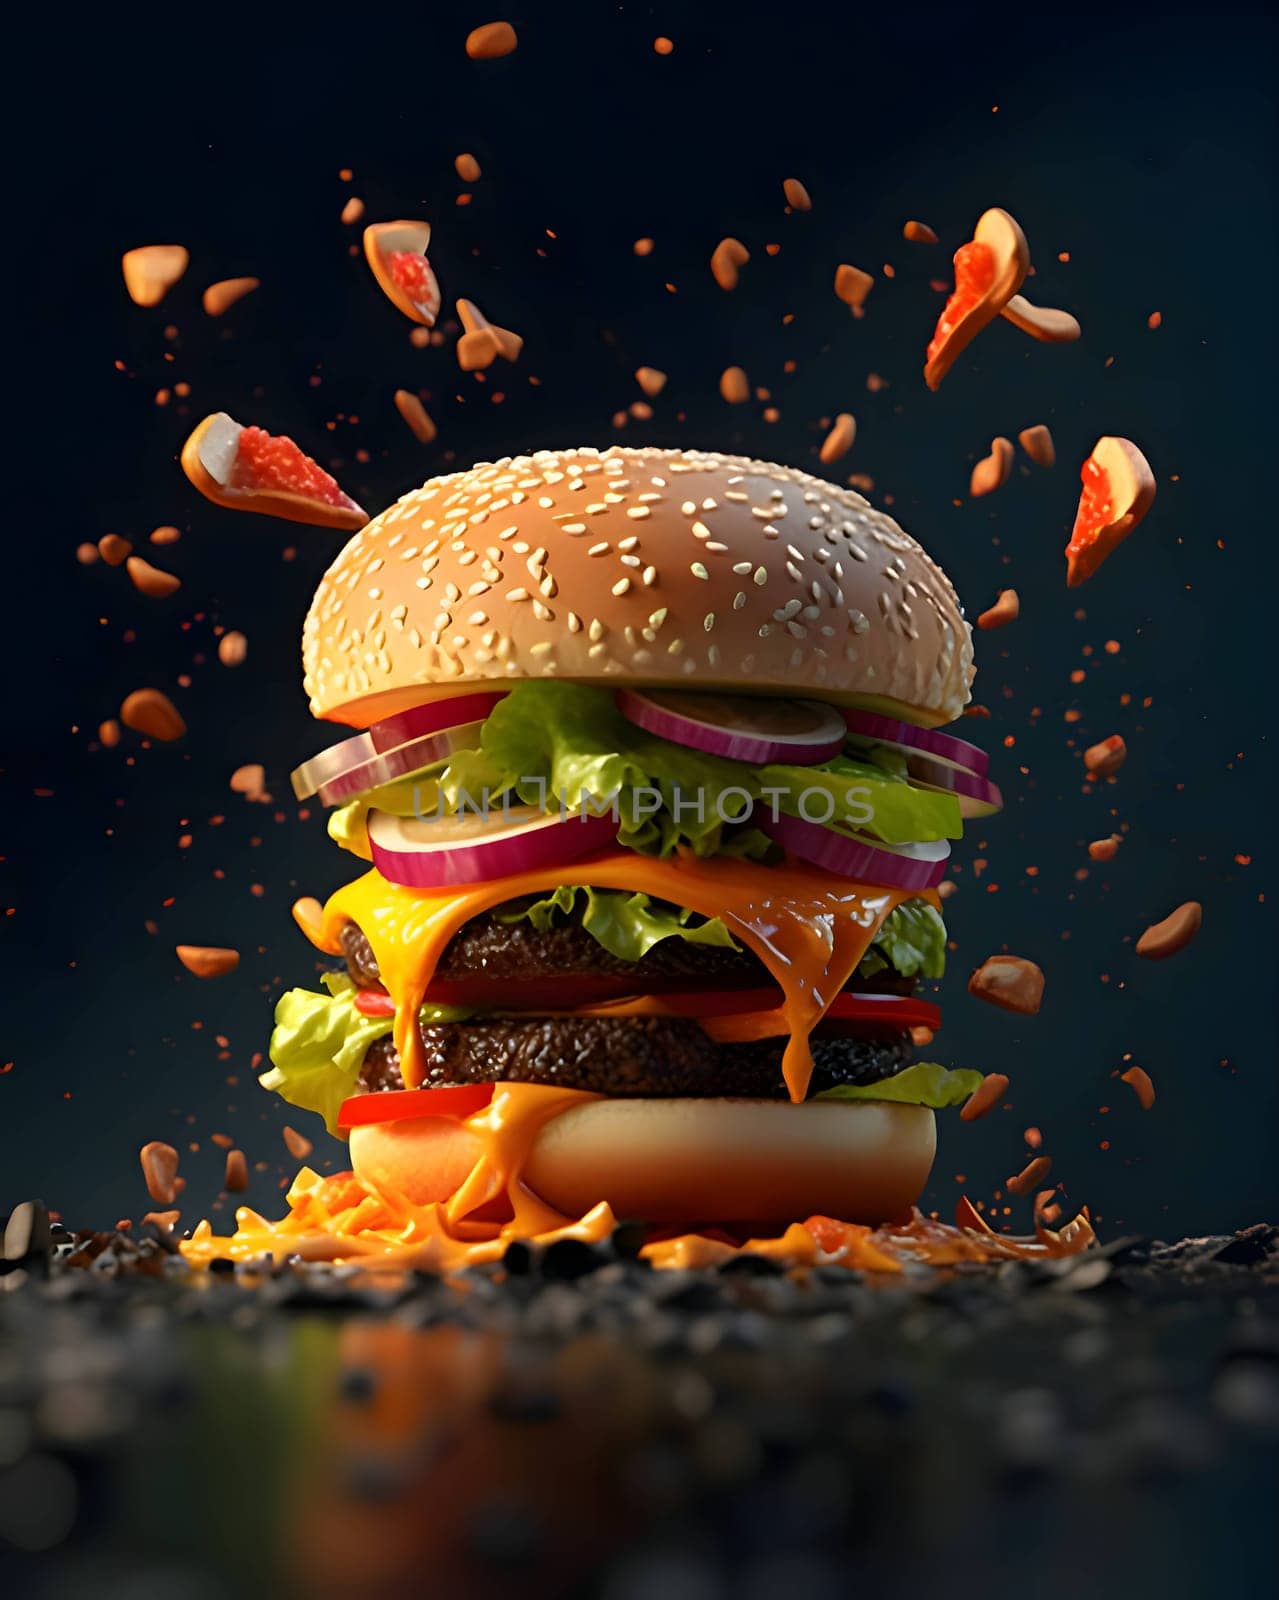 Tasty multi-layered burger with lettuce, cheese, tomato and onion on a dark background by ThemesS